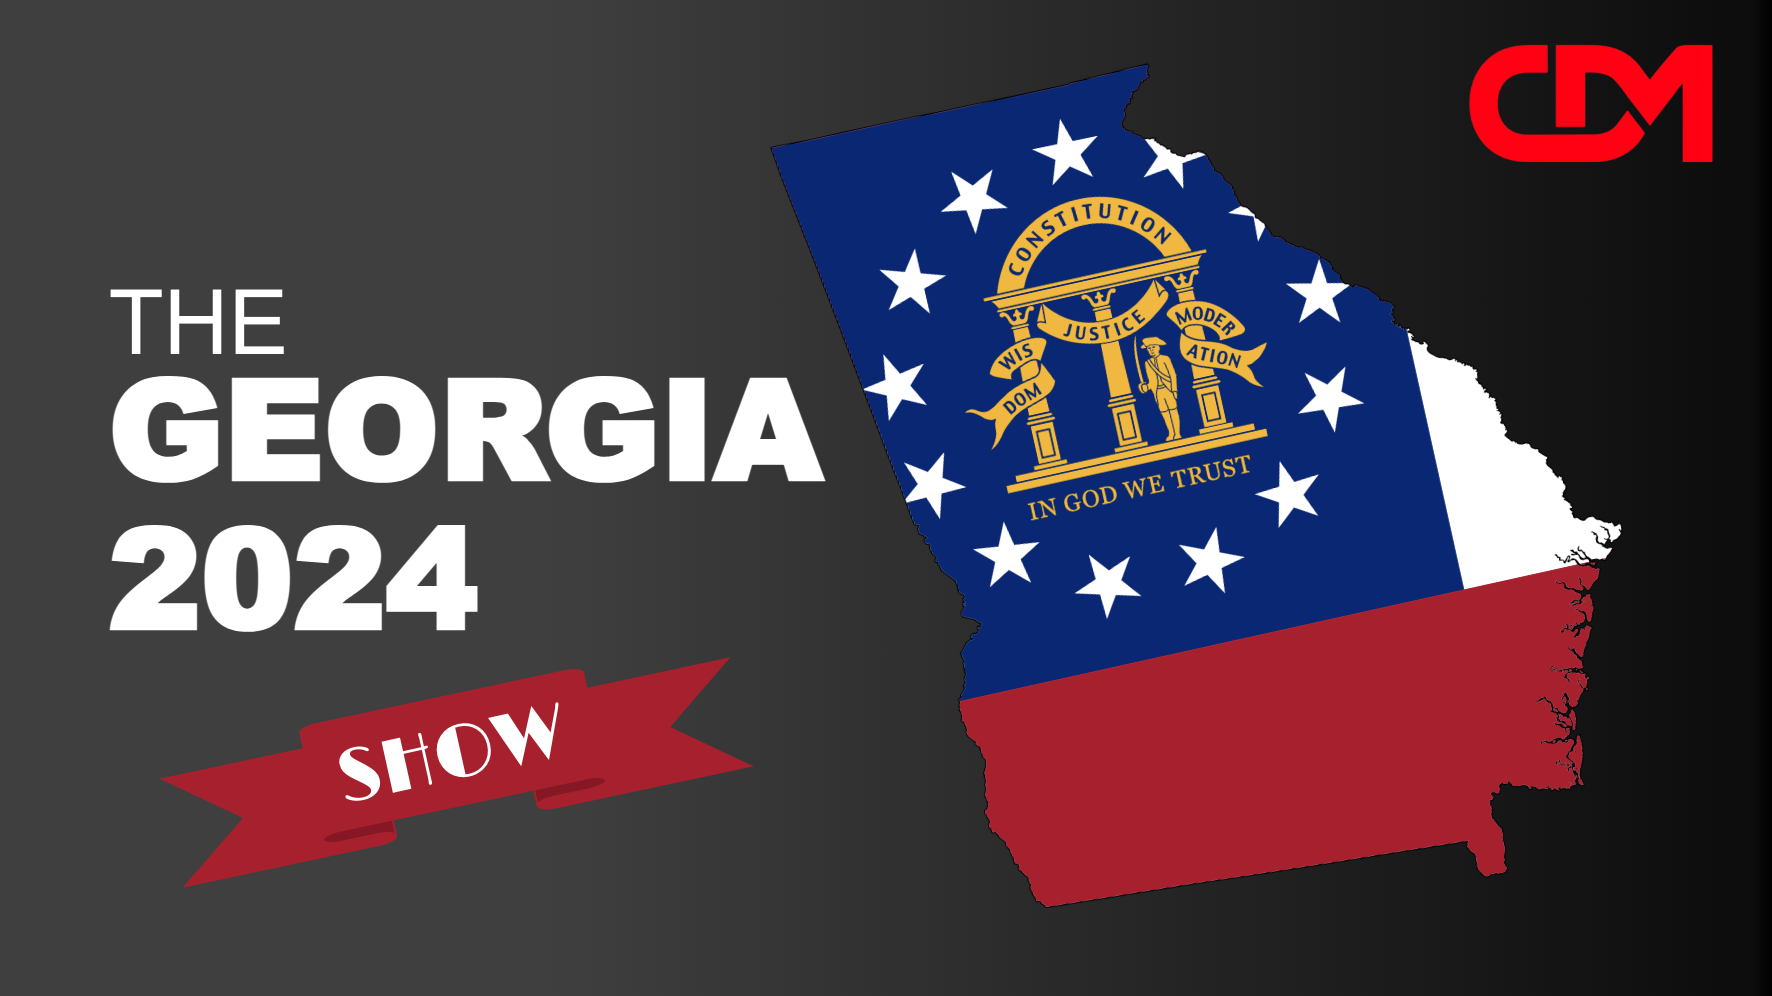 LIVE 2pm EST: The Georgia 2024 Show! Electoral Reform, And Topics Of The Day